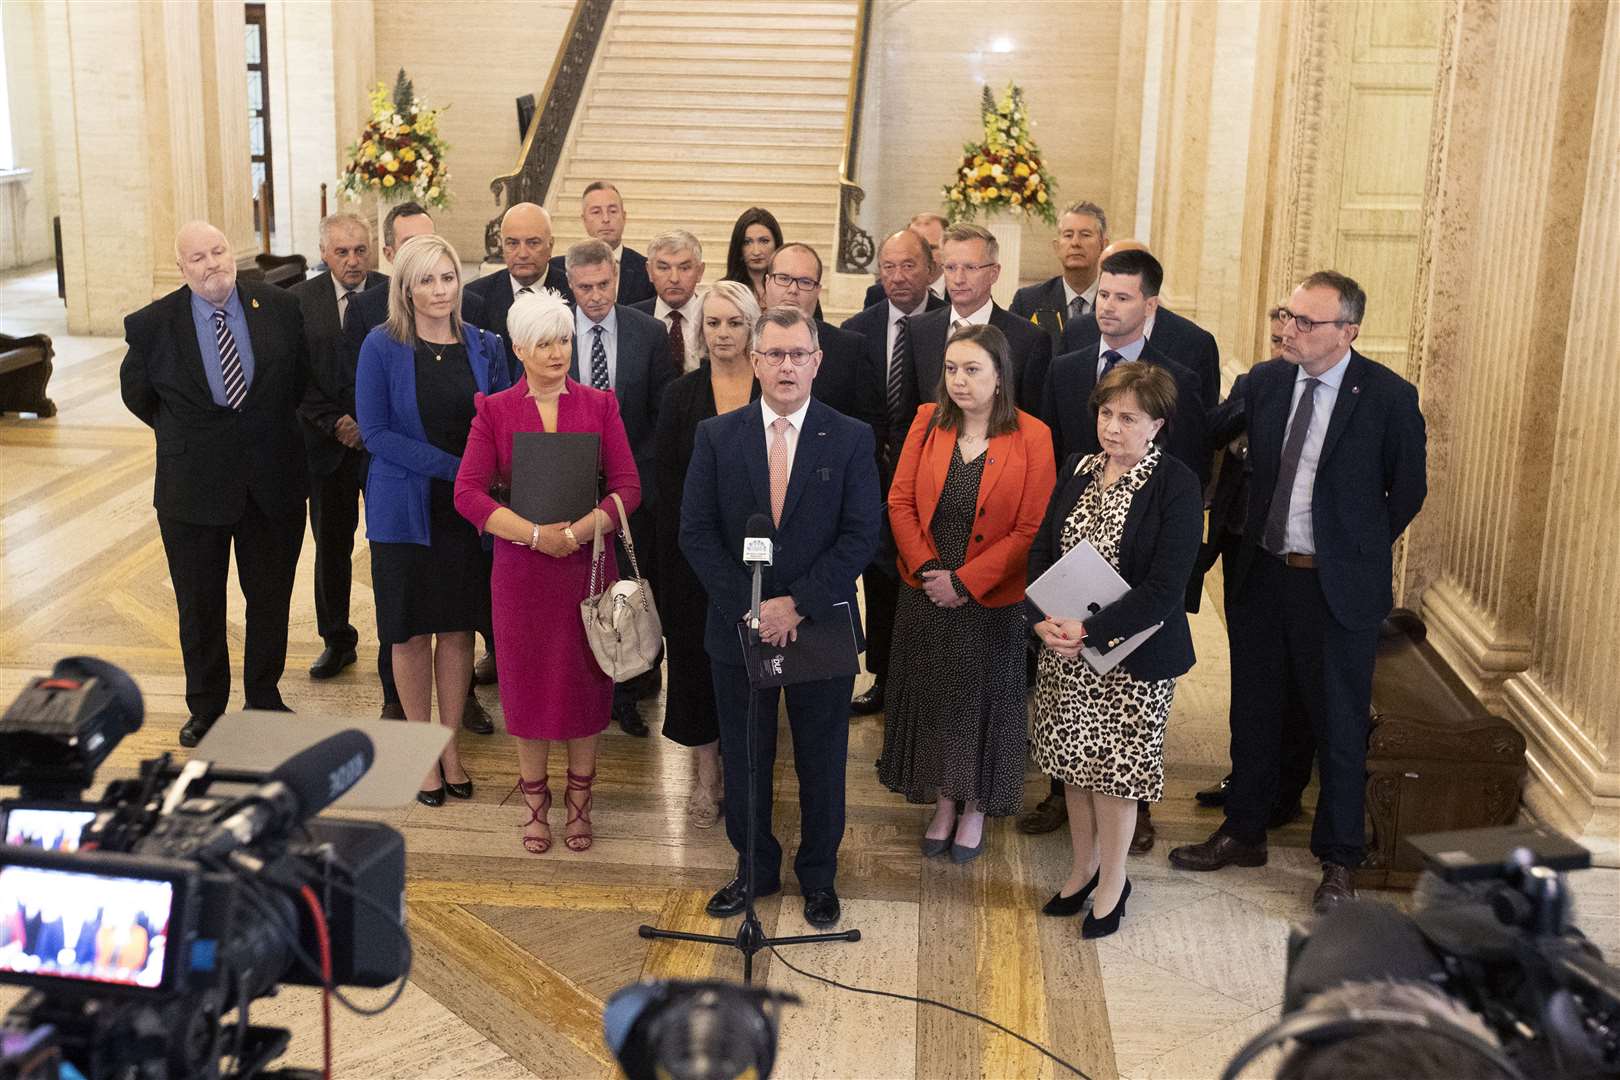 DUP Leader Sir Jeffrey Donaldson with party colleagues speaking in the Great Hall of Parliament Buildings at Stormont on Friday (Liam McBurney/PA)